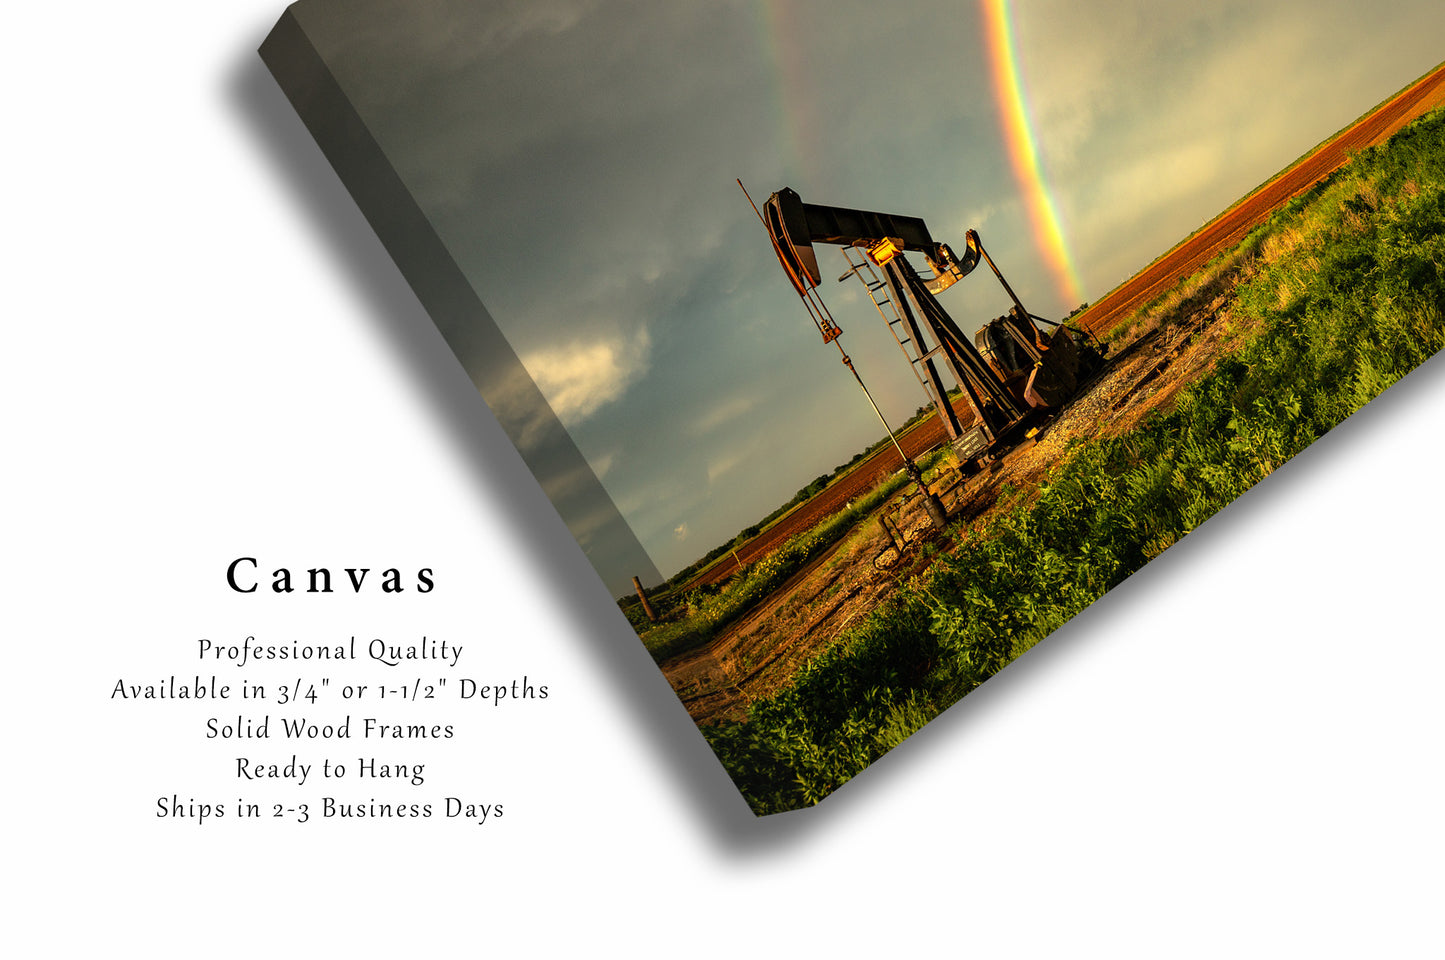 Canvas Wall Art - Gallery Wrap of Rainbow Ending at Pump Jack in Texas - Oilfield Photography Oil and Gas Photo Artwork Decor